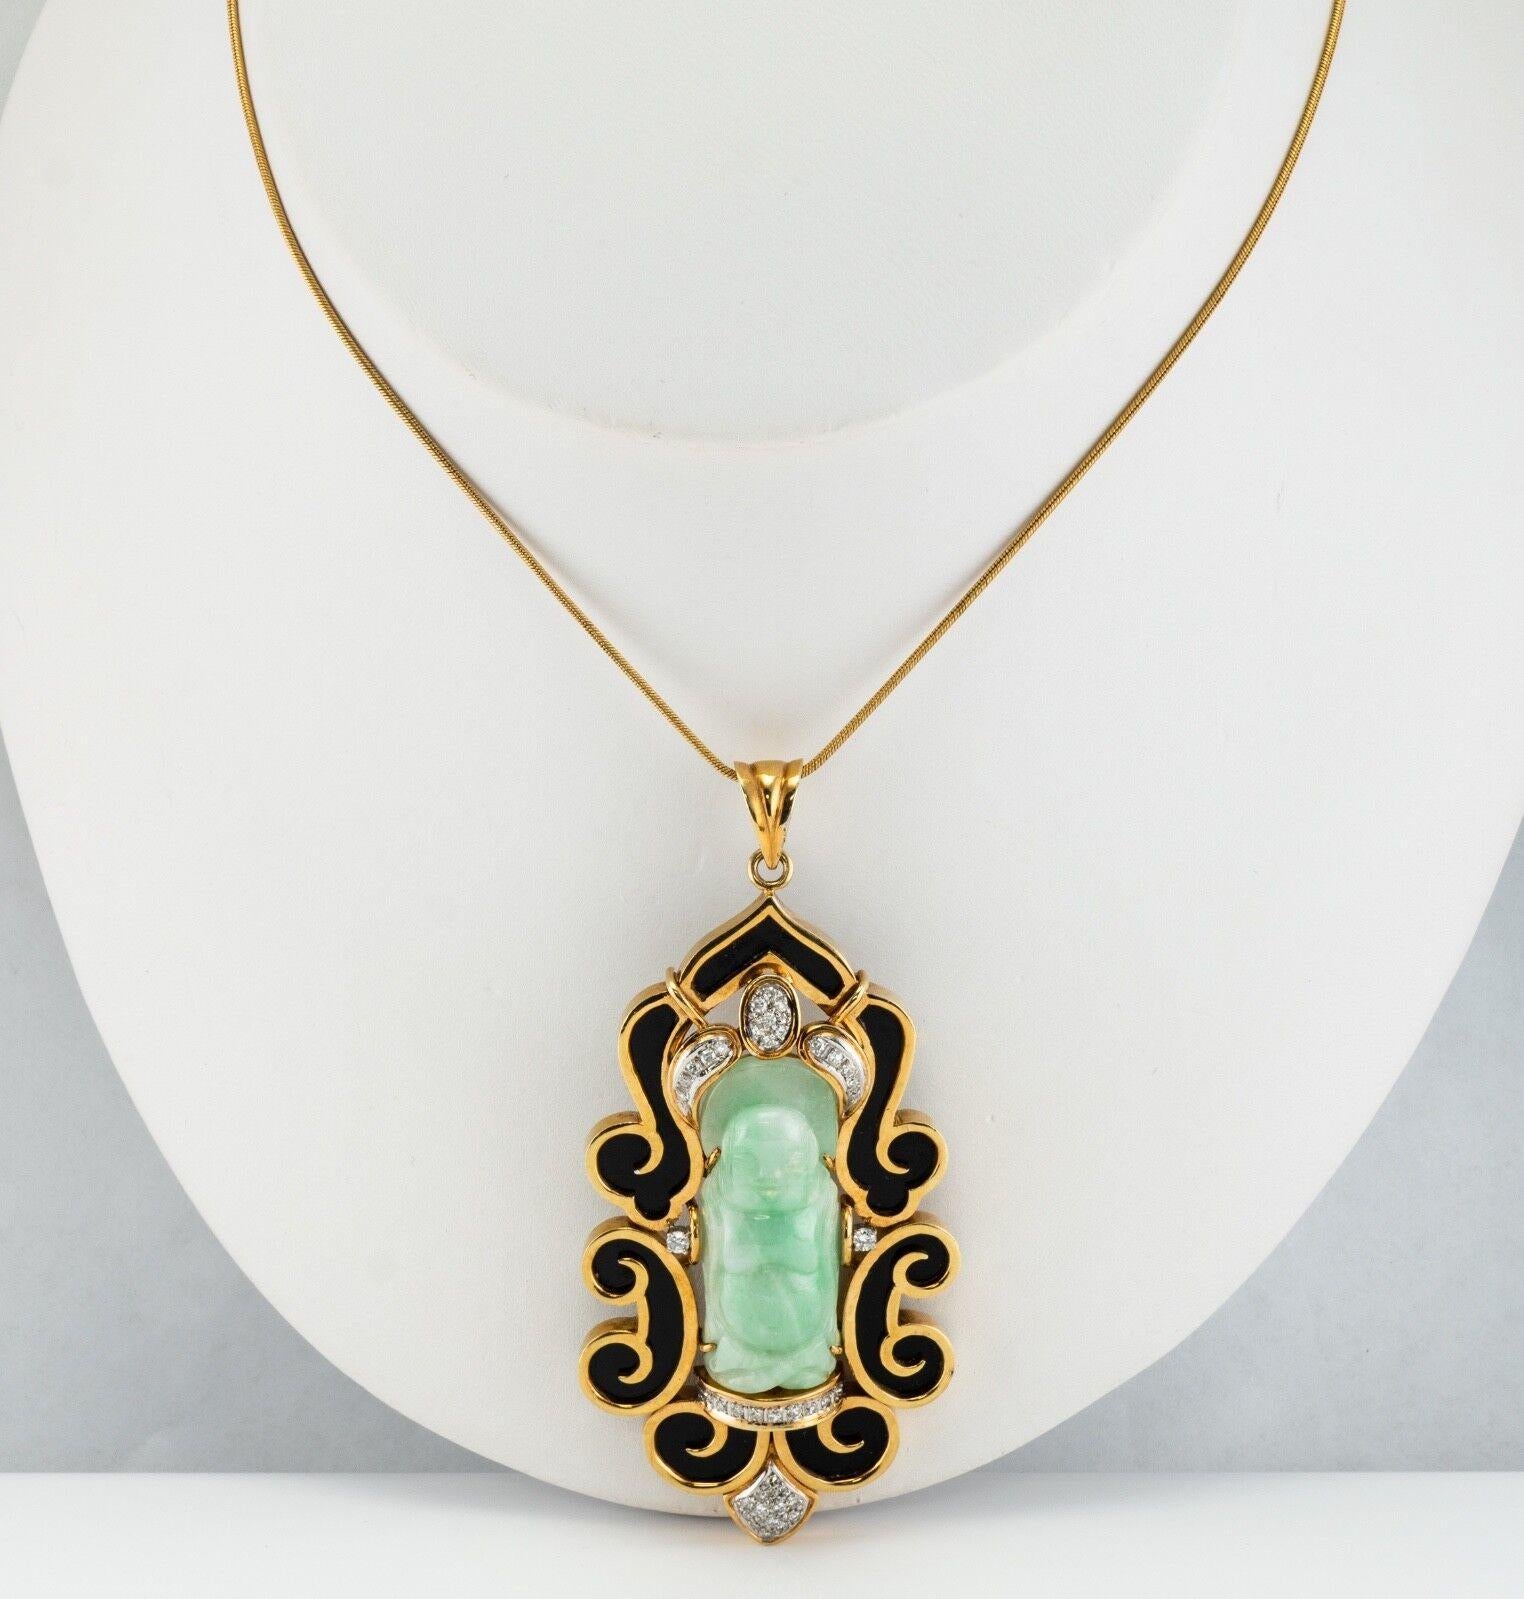 This one of a kind estate pendant is finely crafted in solid 14K Gold and set with a genuine carved Jade, diamonds, and black onyx. The carved Buddha measures 1-5/16